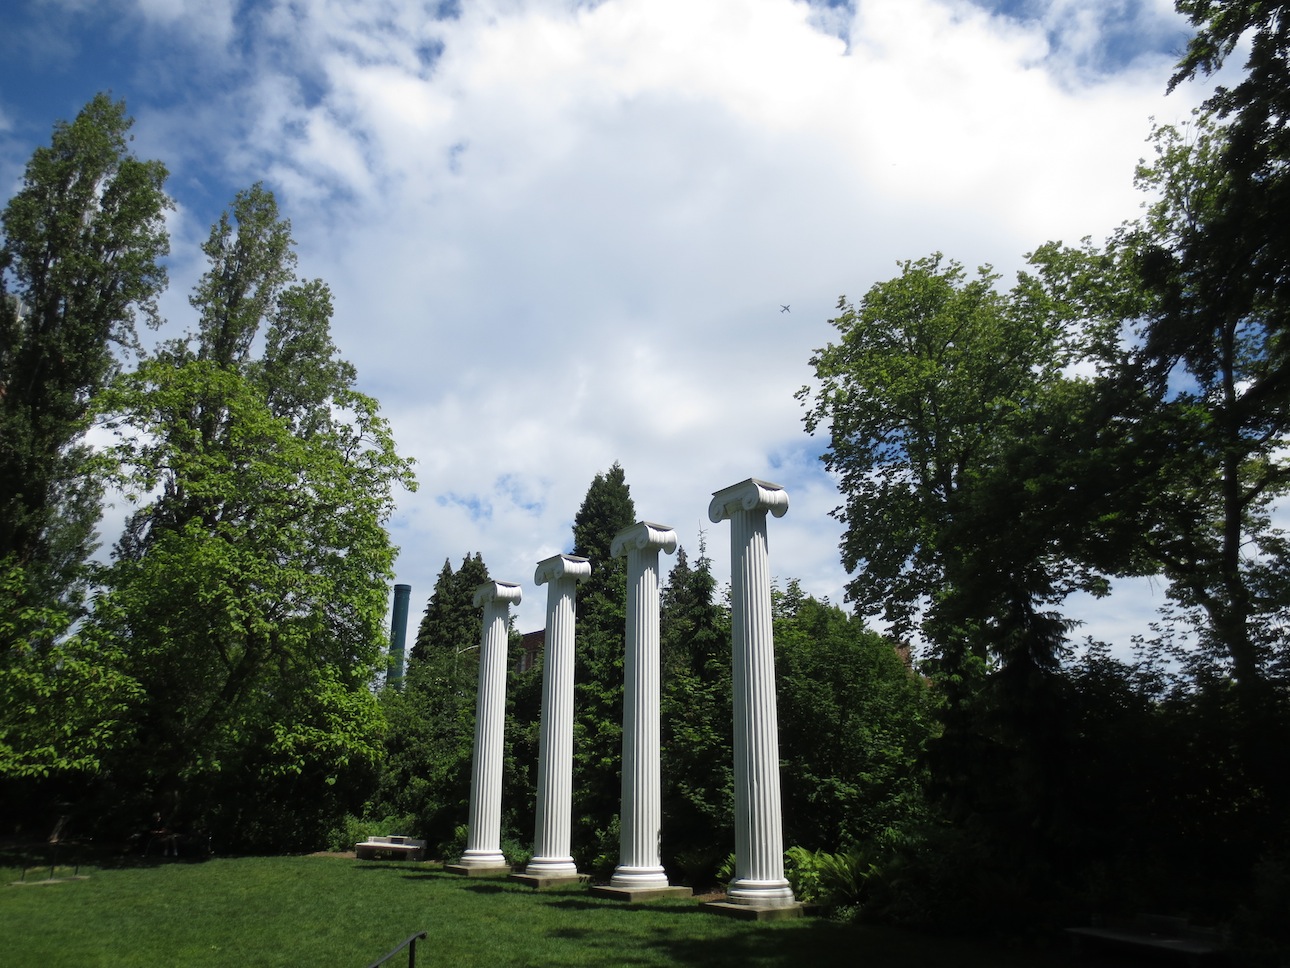 Columns in the grove next to the computer science building.